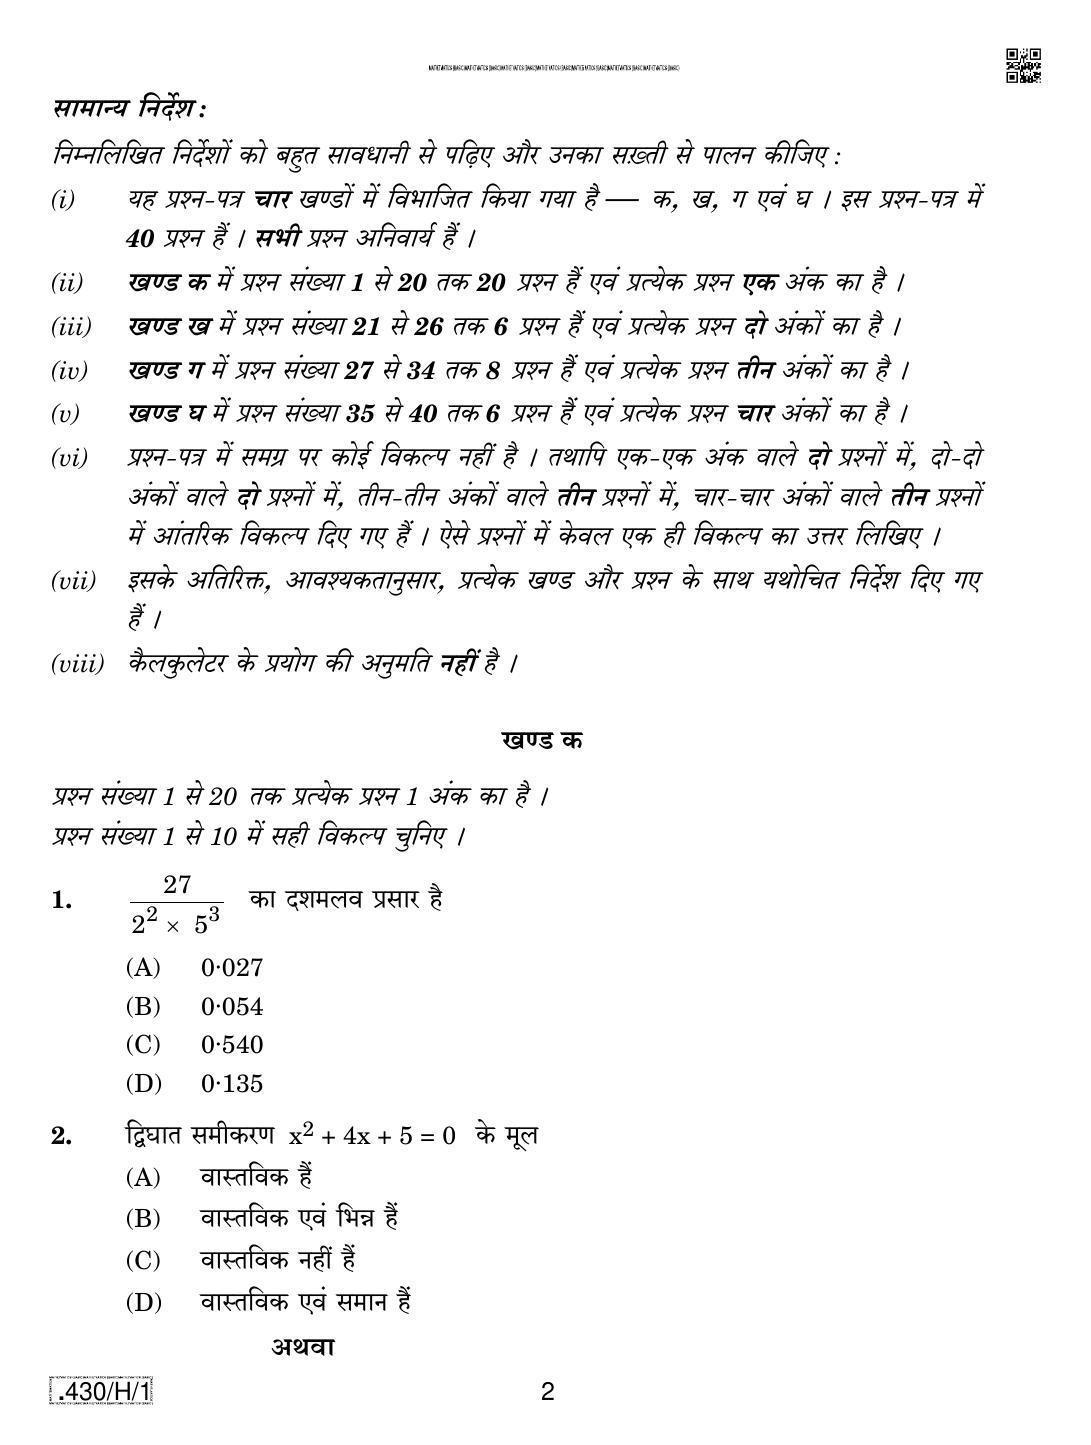 CBSE Class 10 430-C-1 - Maths (Basic) 2020 Compartment Question Paper - Page 2